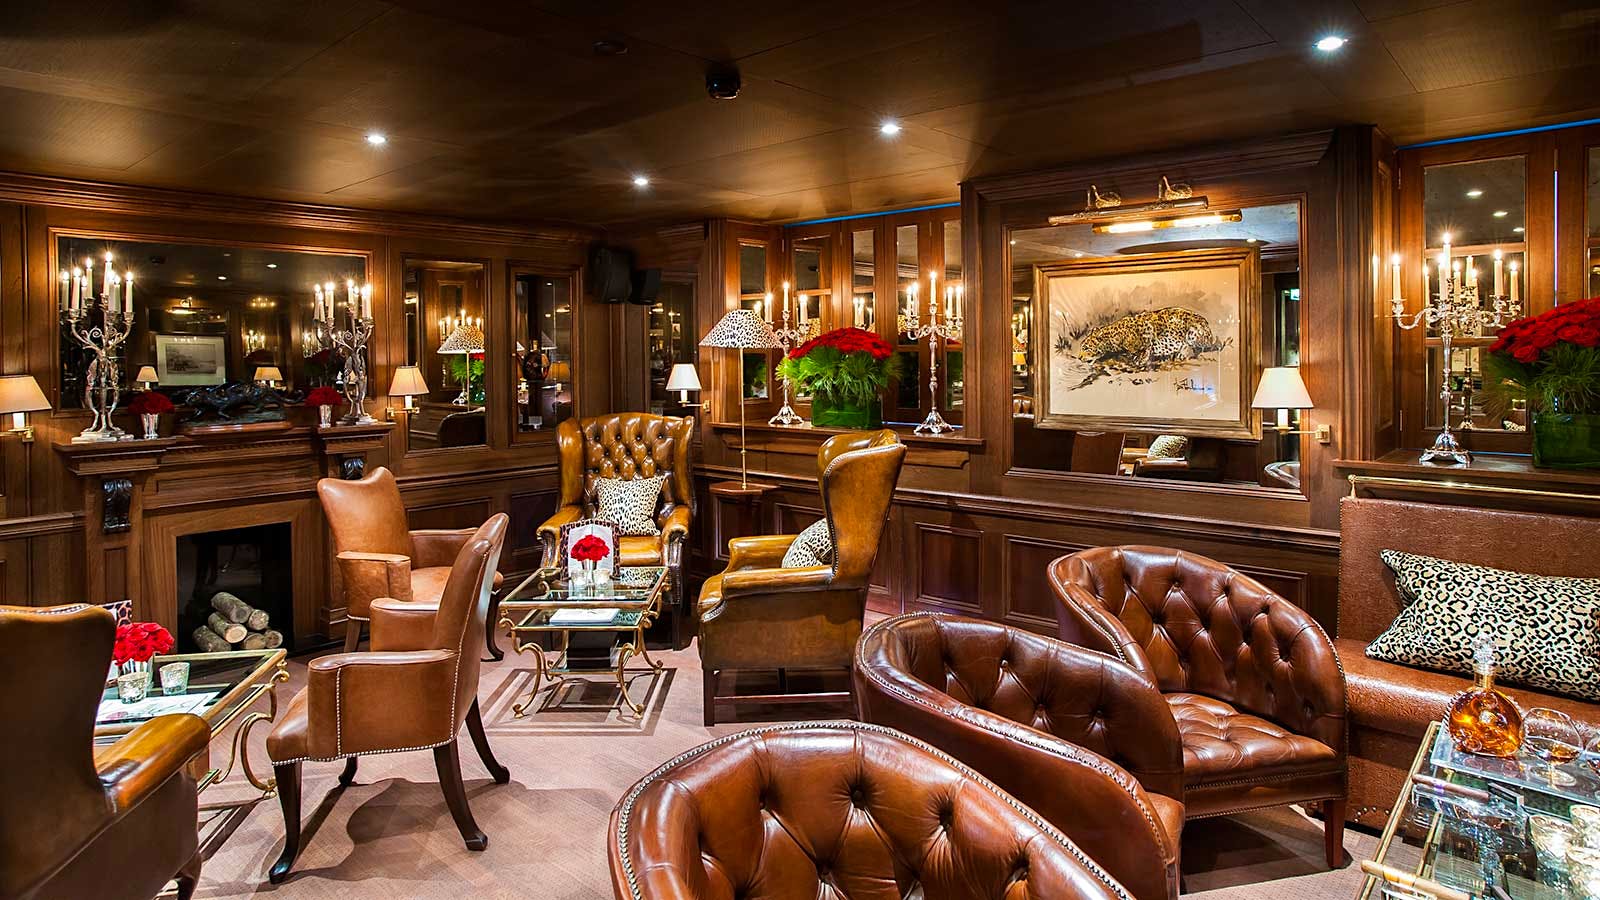 The Cigar Lounge at the Leopard Bar has proven so popular, both for hotel guests, tourists and the regular local after-work crowd, that they had to ban cigarettes to keep enough seats for cigar lovers.